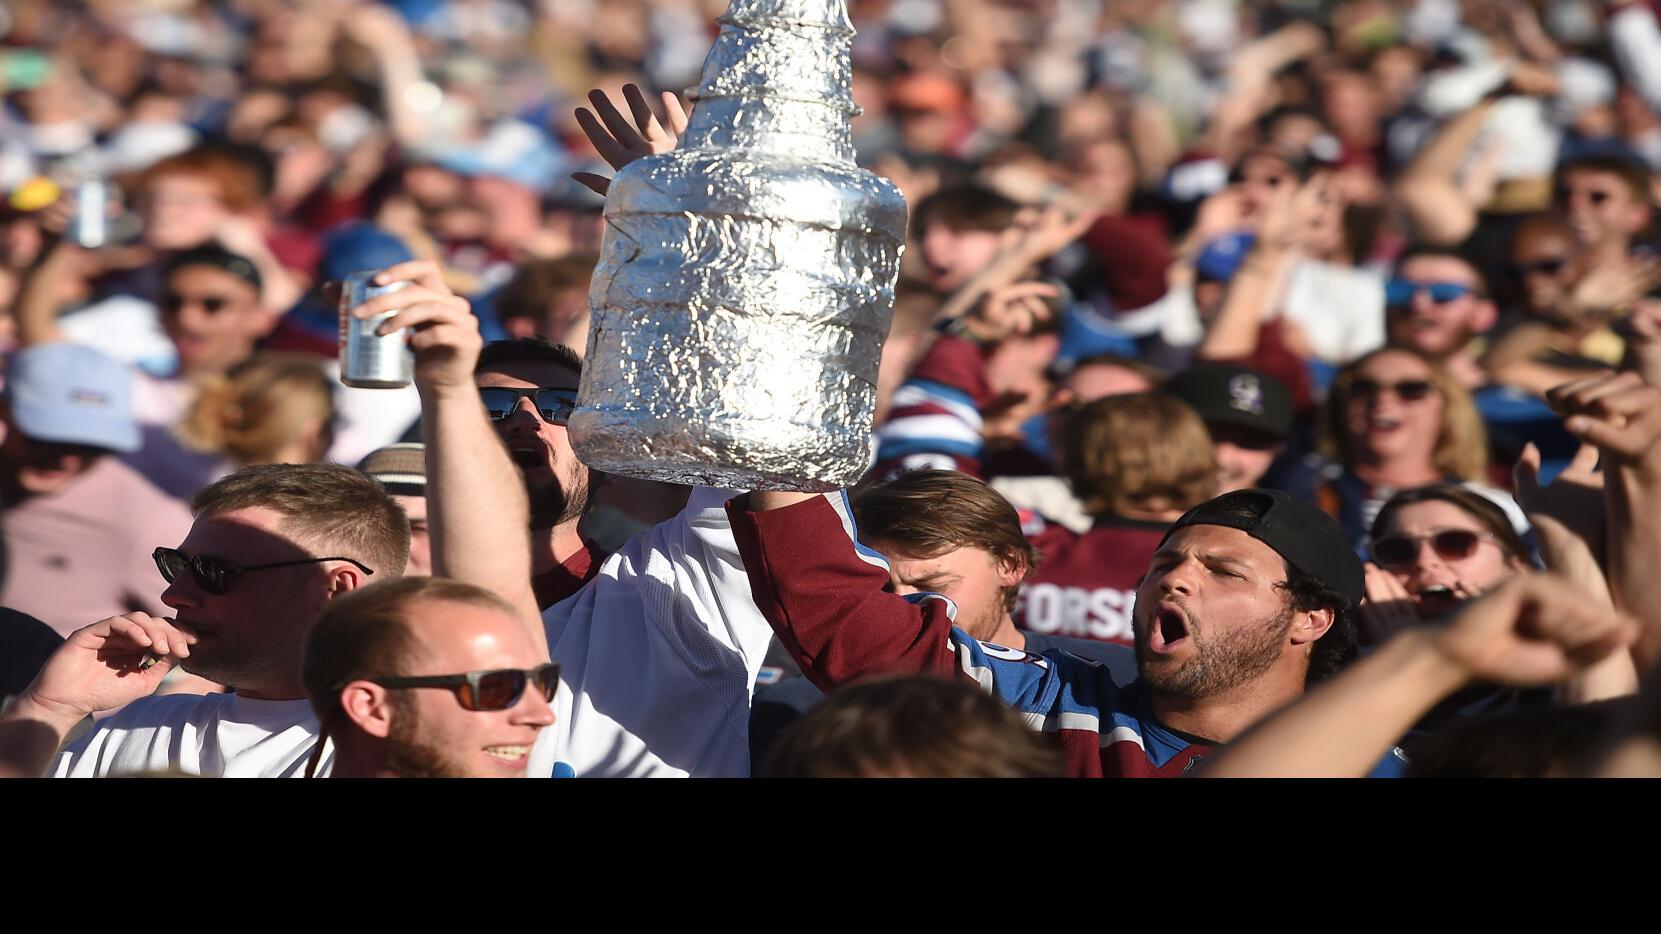 PHOTOS: Avalanche fans celebrate in downtown Denver after Stanley Cup win